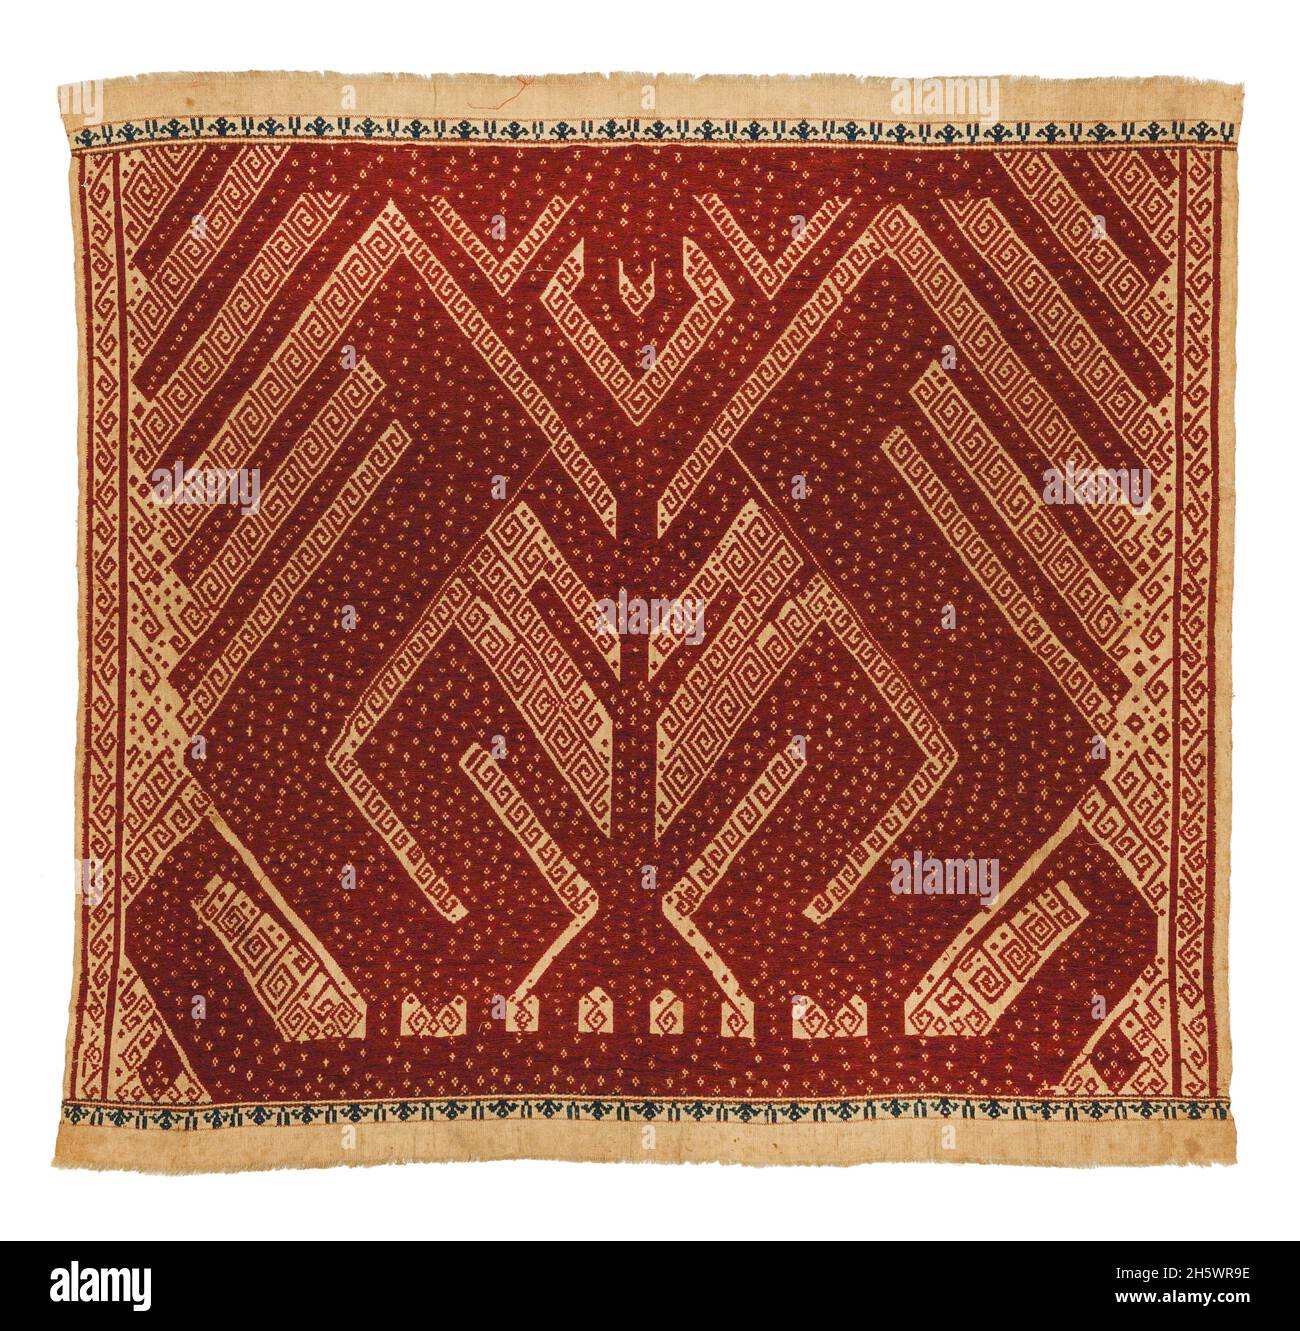 Ceremonial textile, C19th, Lampung, Sumatra. Tampan were used for rites of passage ceremonies, as the focal point for ritual meals, the seat for elders overseeing traditional law, and tied to newly-built houses. Those woven in blue depict the secular realm, those in red the sacred. Examples from the mountainous interior show stylised natural or domestic subjects and geometric designs, while those from the coast (tampan pasisir) display richly detailed scenes of ships and other motifs. The ship, the main motif, symbolises movement, appropriate to the rites of passage rituals. Stock Photo